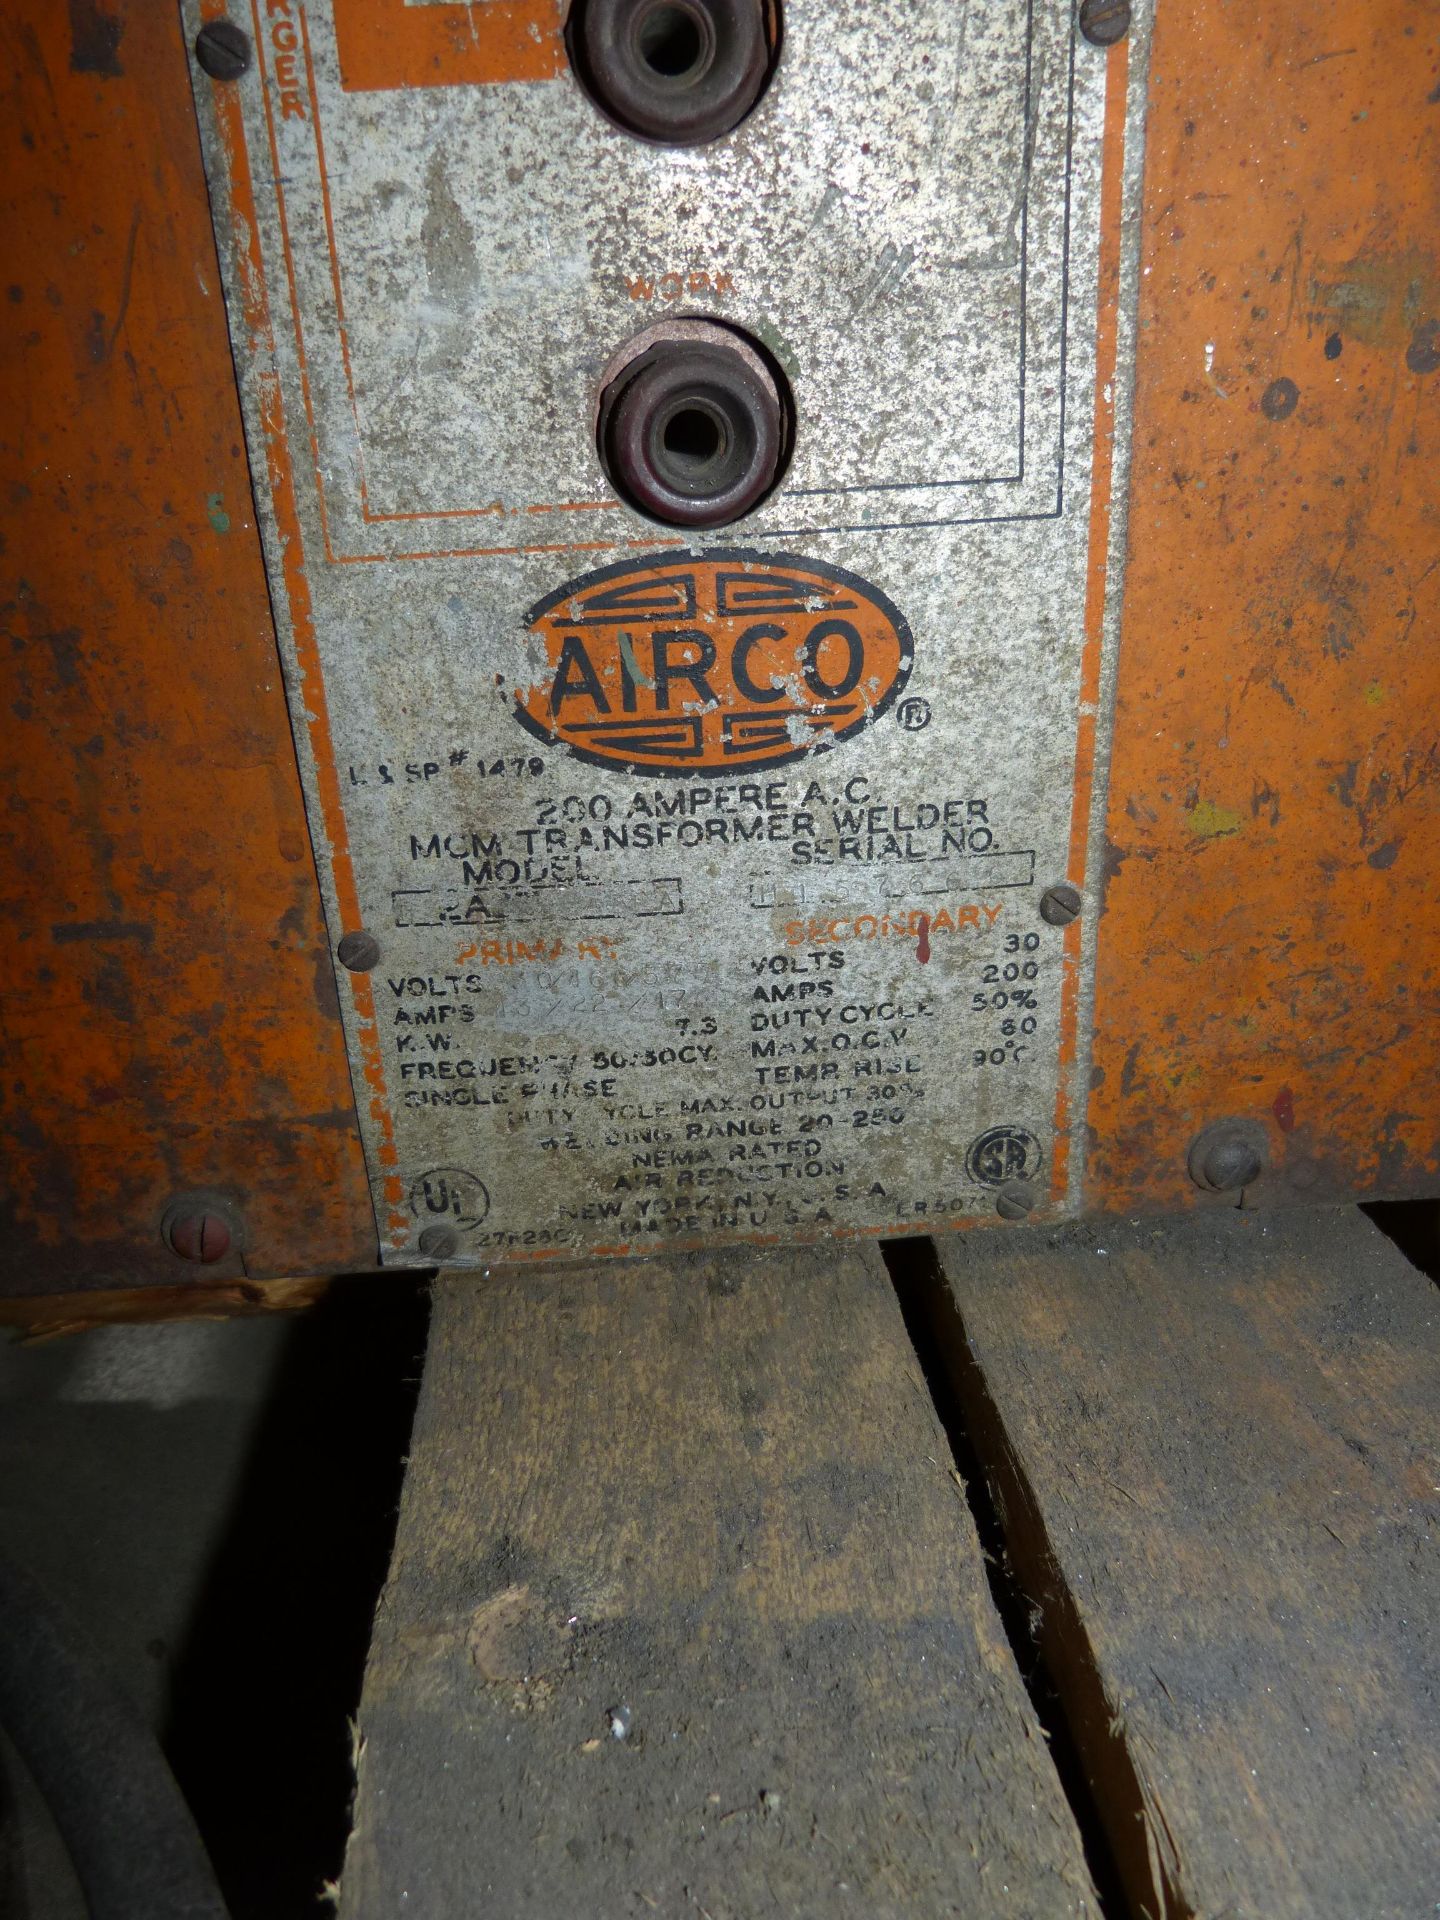 AIRCO 300 AMP STICK ARC WELDER - Image 5 of 5